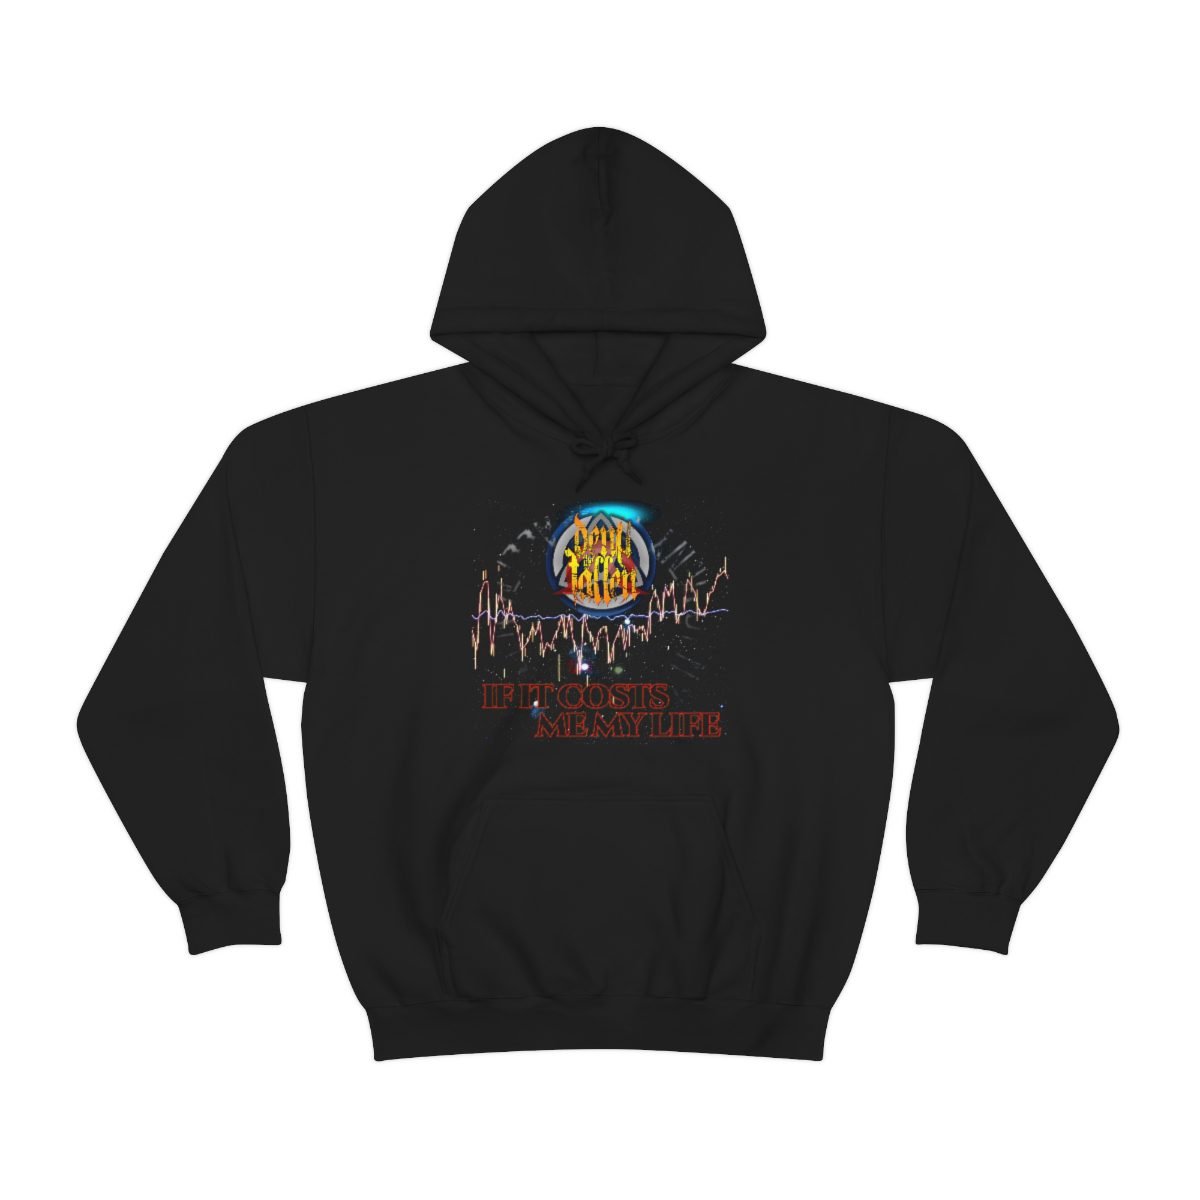 Deny The Fallen – If It Costs Me My Life Pullover Hooded Sweatshirt